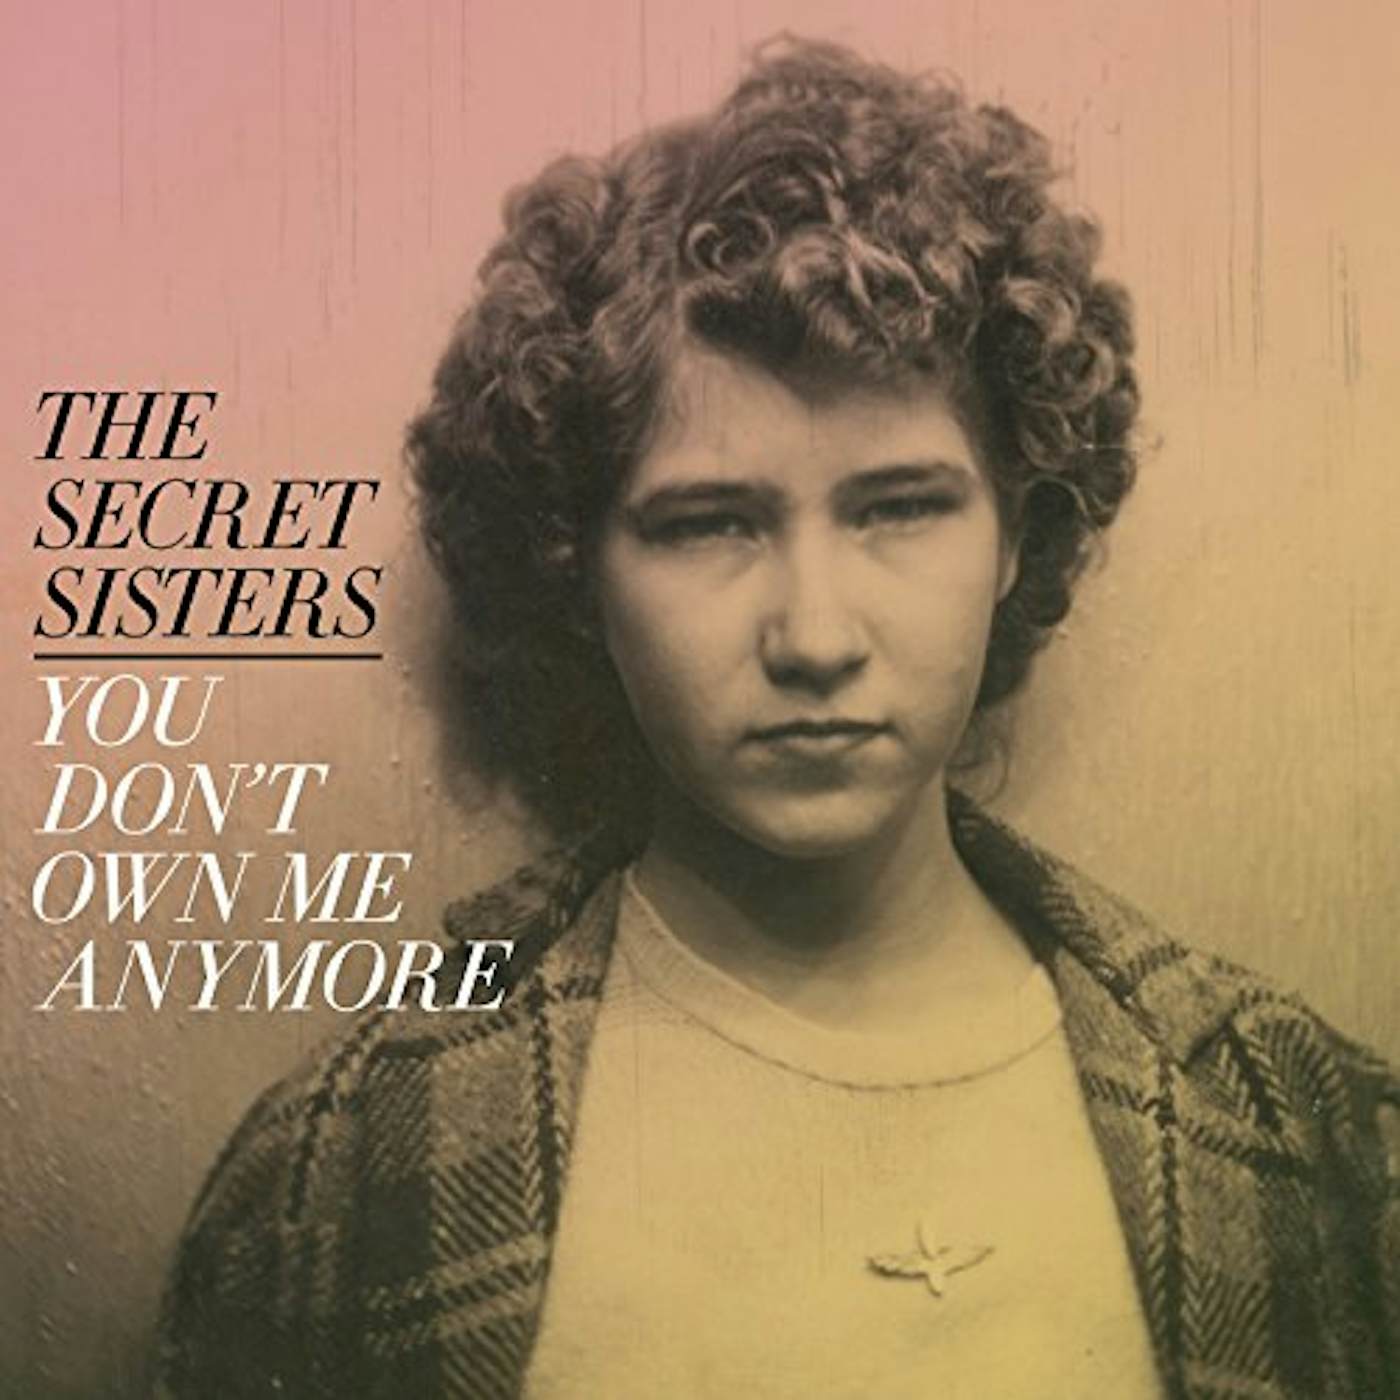 The Secret Sisters YOU DON'T OWN ME ANYMORE (150G/DL CODE) Vinyl Record